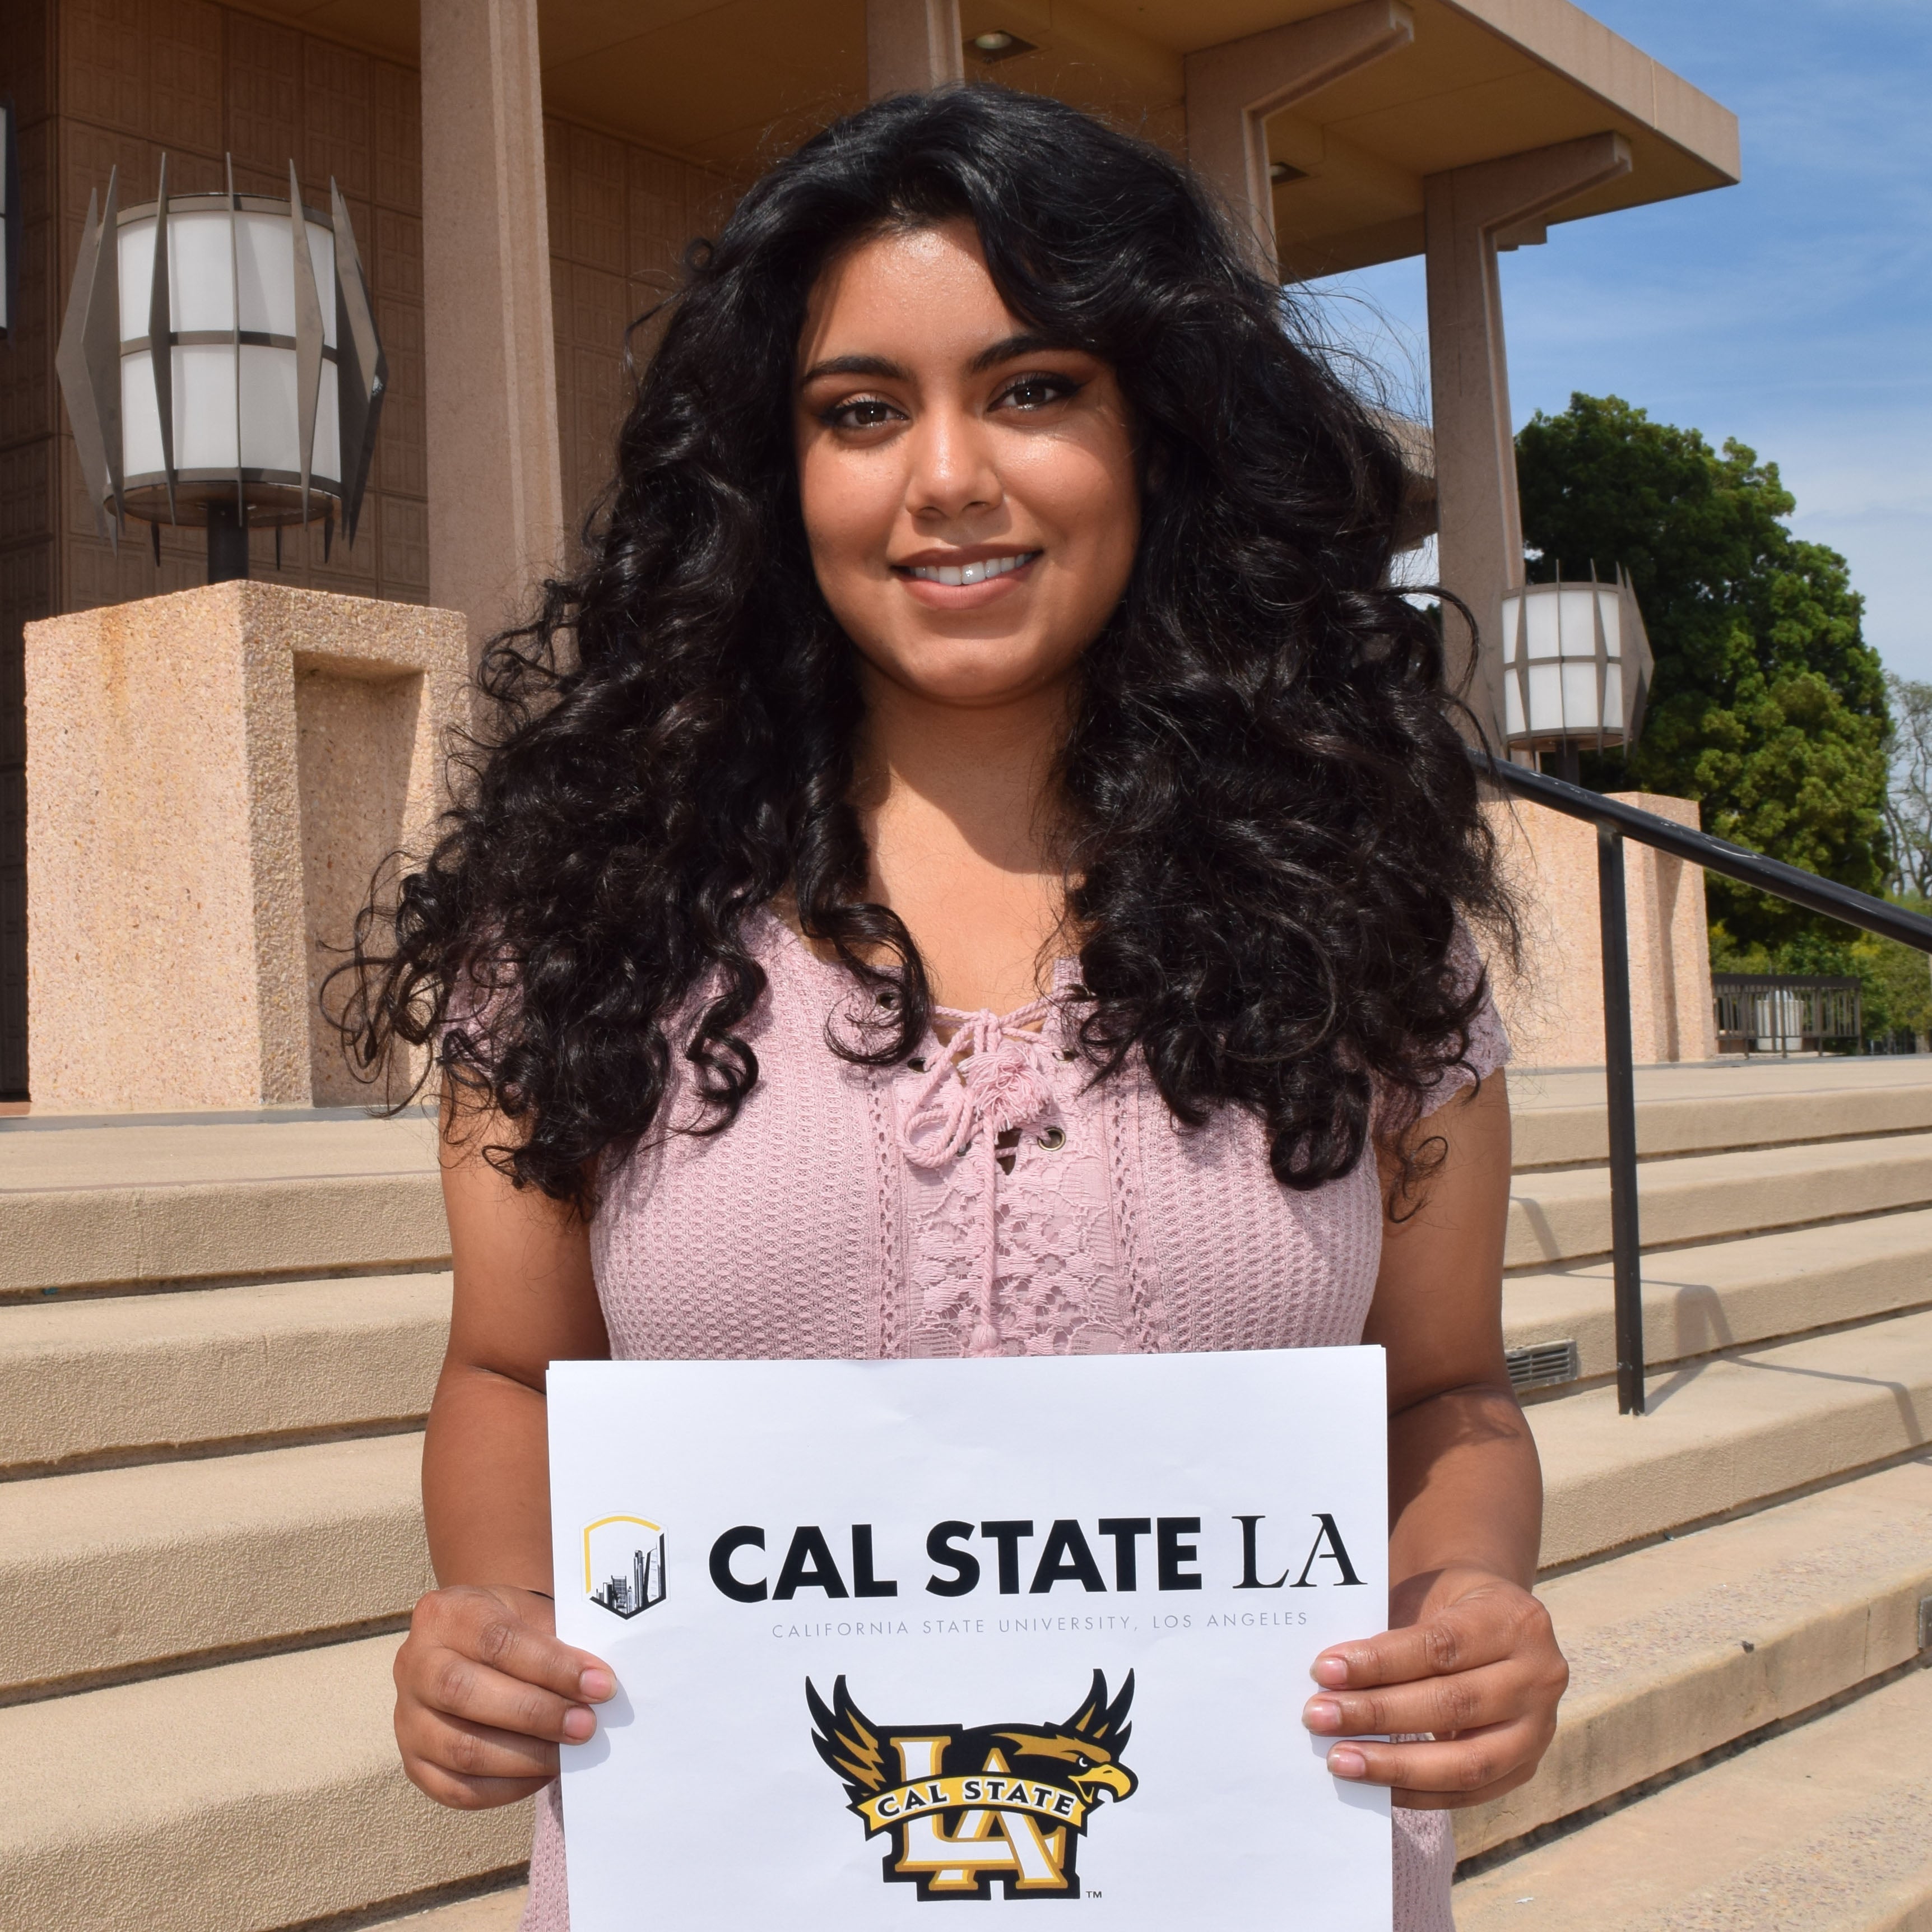 Adriana holds sign showing her graduate school choice Cal State LA